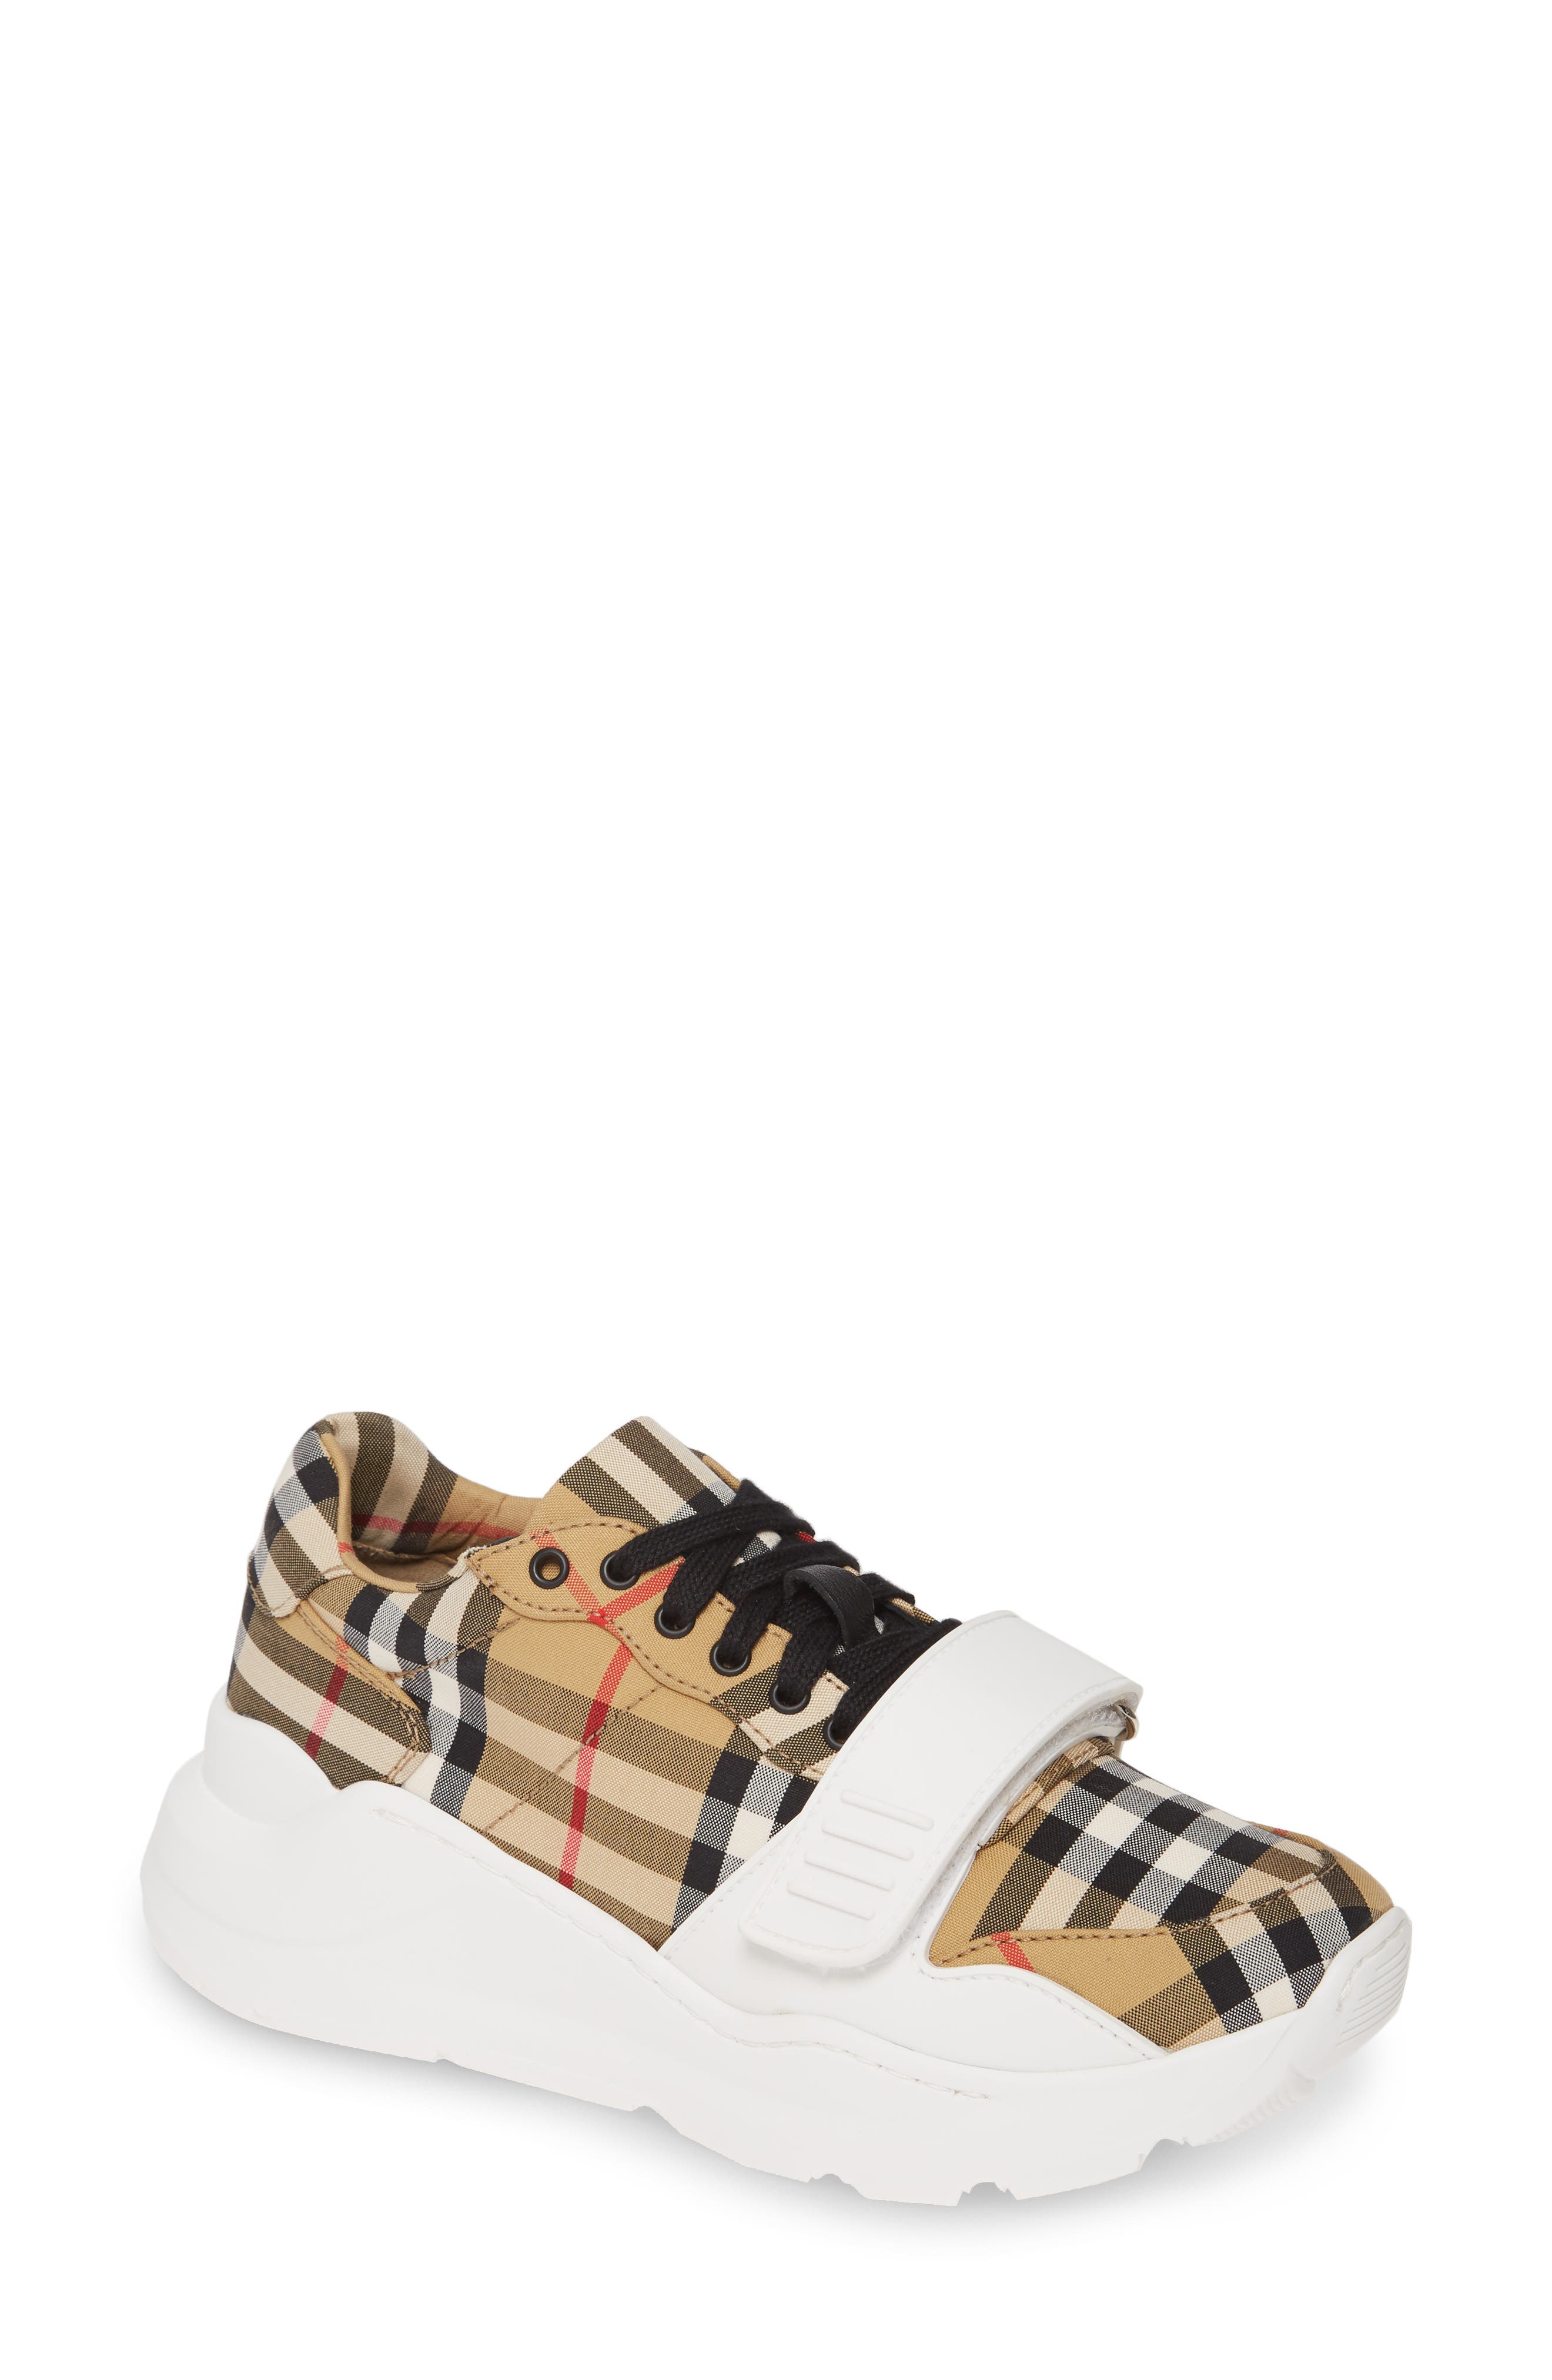 burberry running shoes